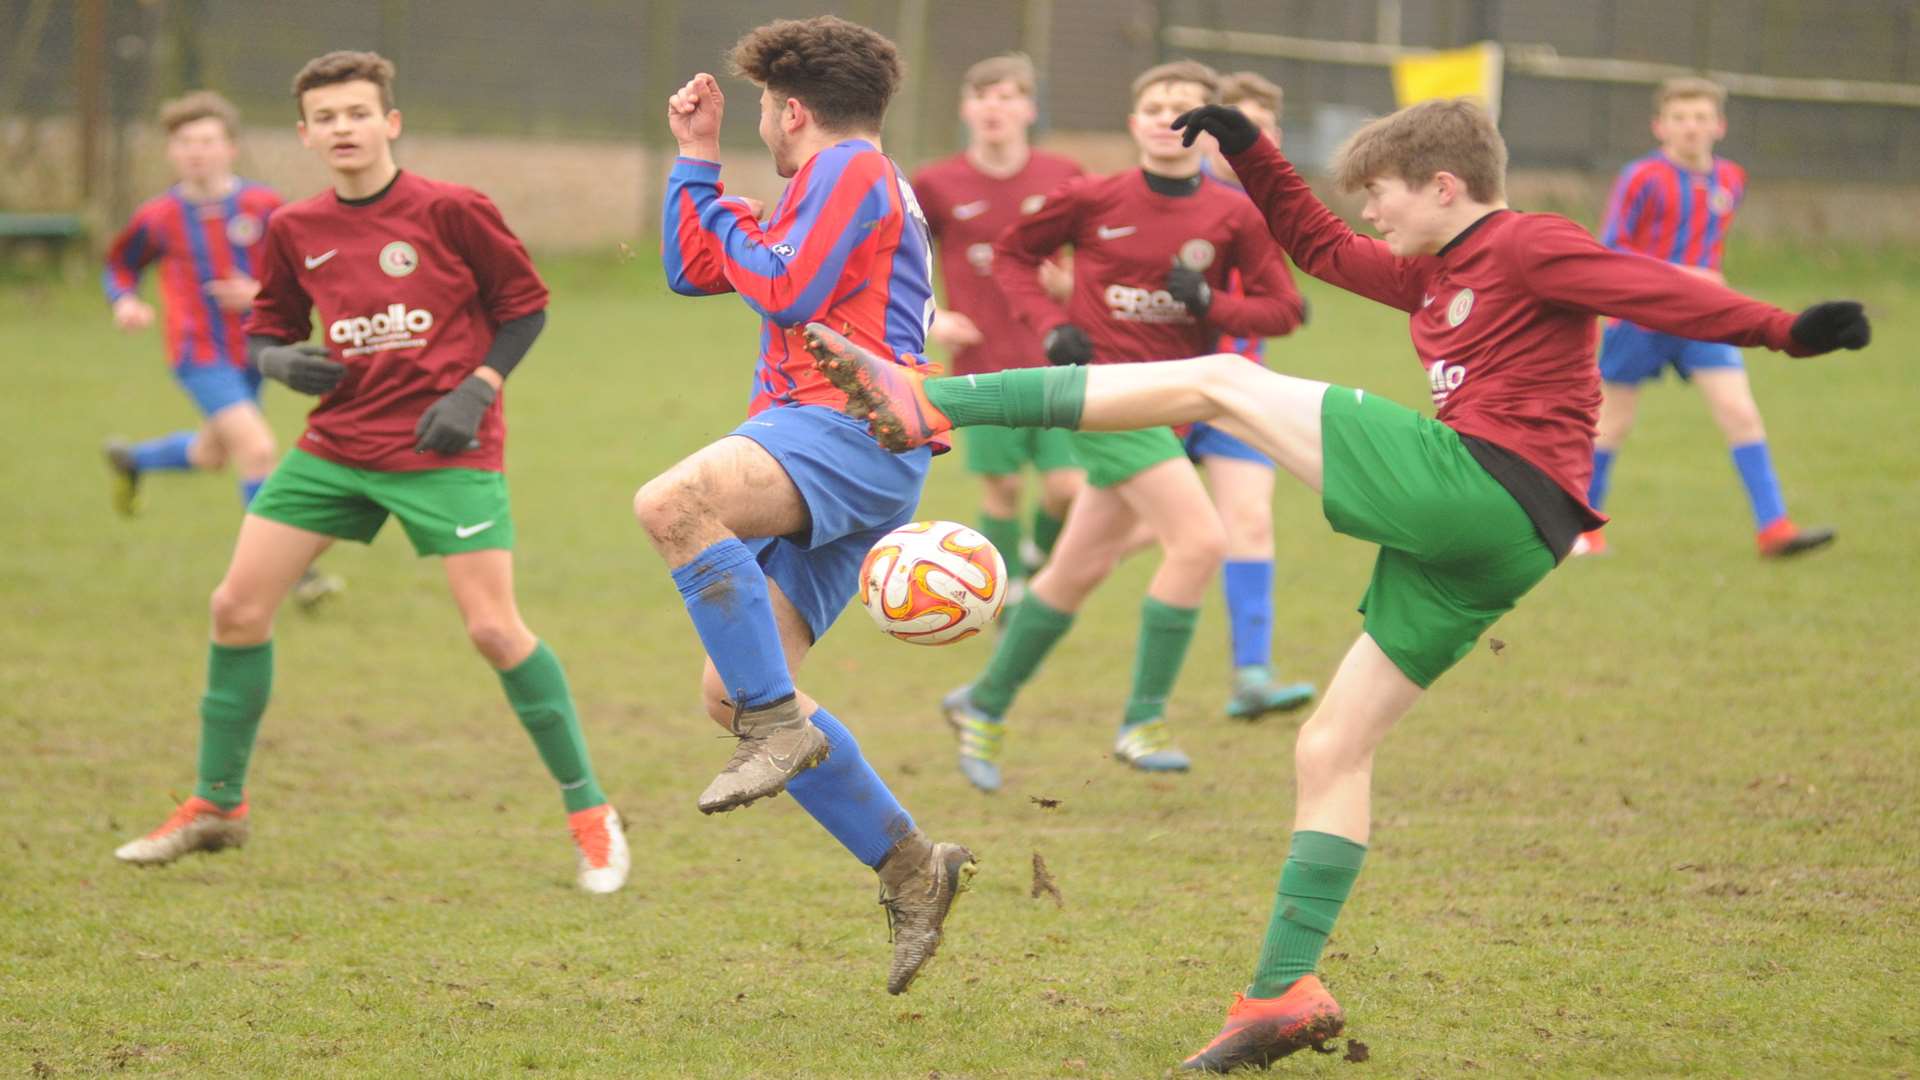 Cobham Colts under-16s (red and green) and Woodpecker HI get stuck in Picture: Steve Crispe